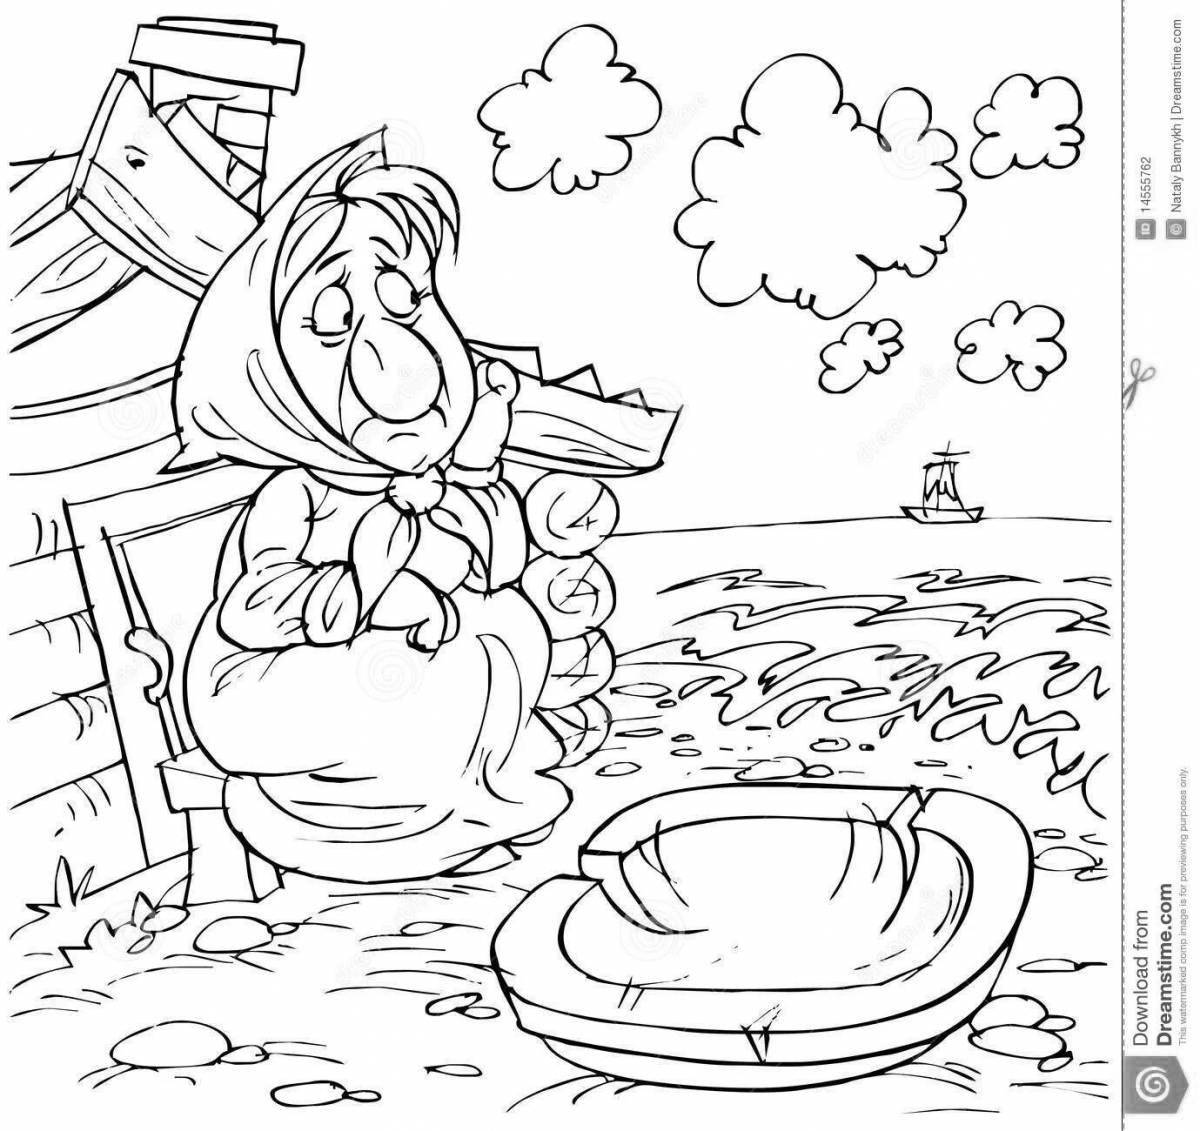 Joyful coloring book based on the tale of the fisherman and the fish drawing